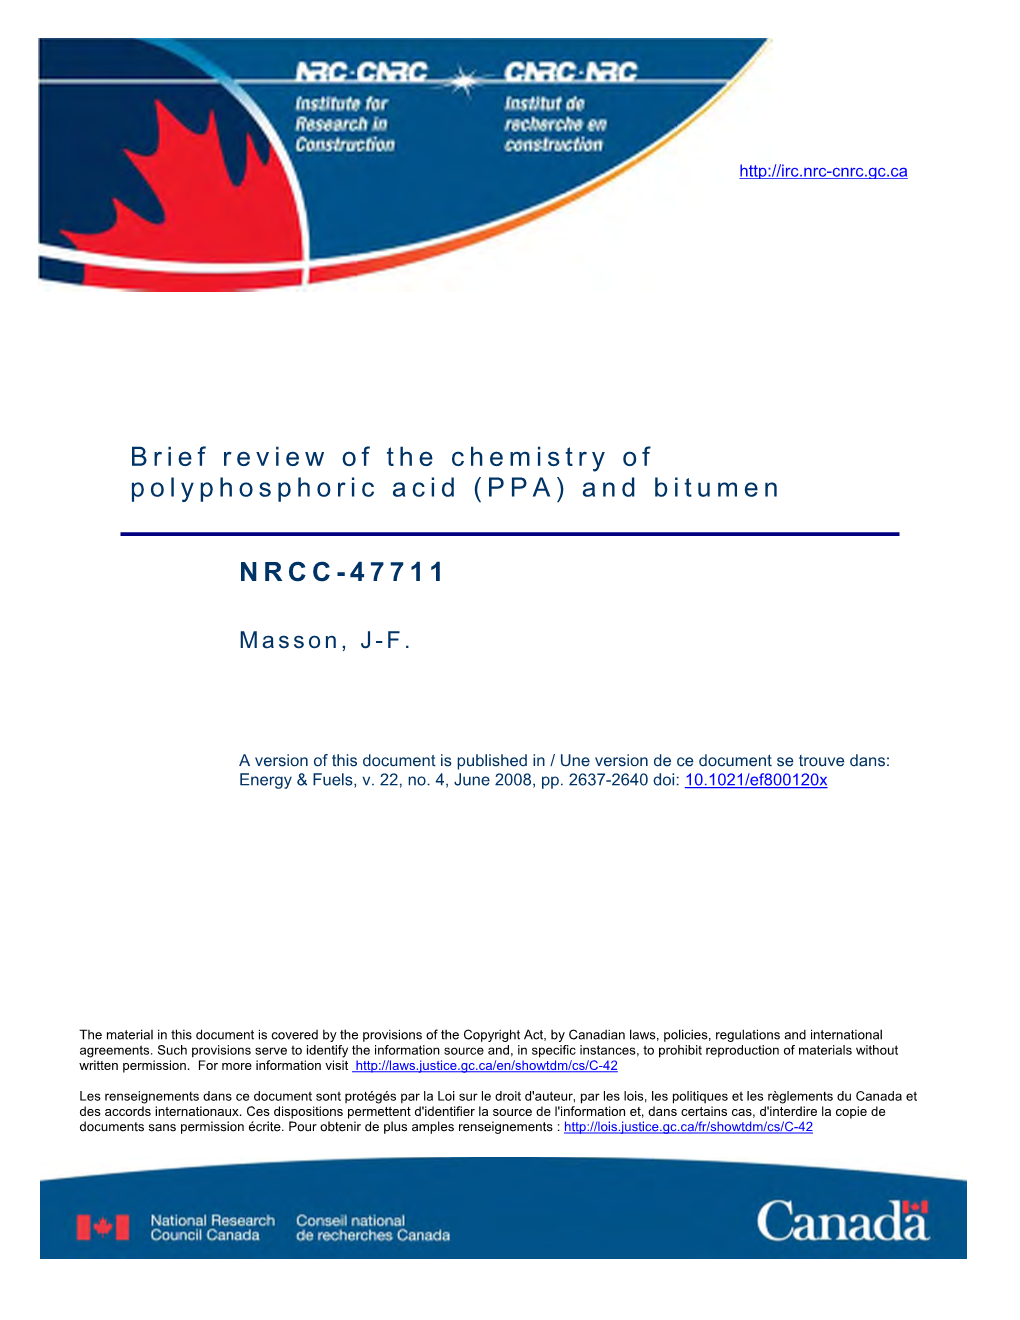 Brief Review of the Chemistry of Polyphosphoric Acid (PPA) and Bitumen